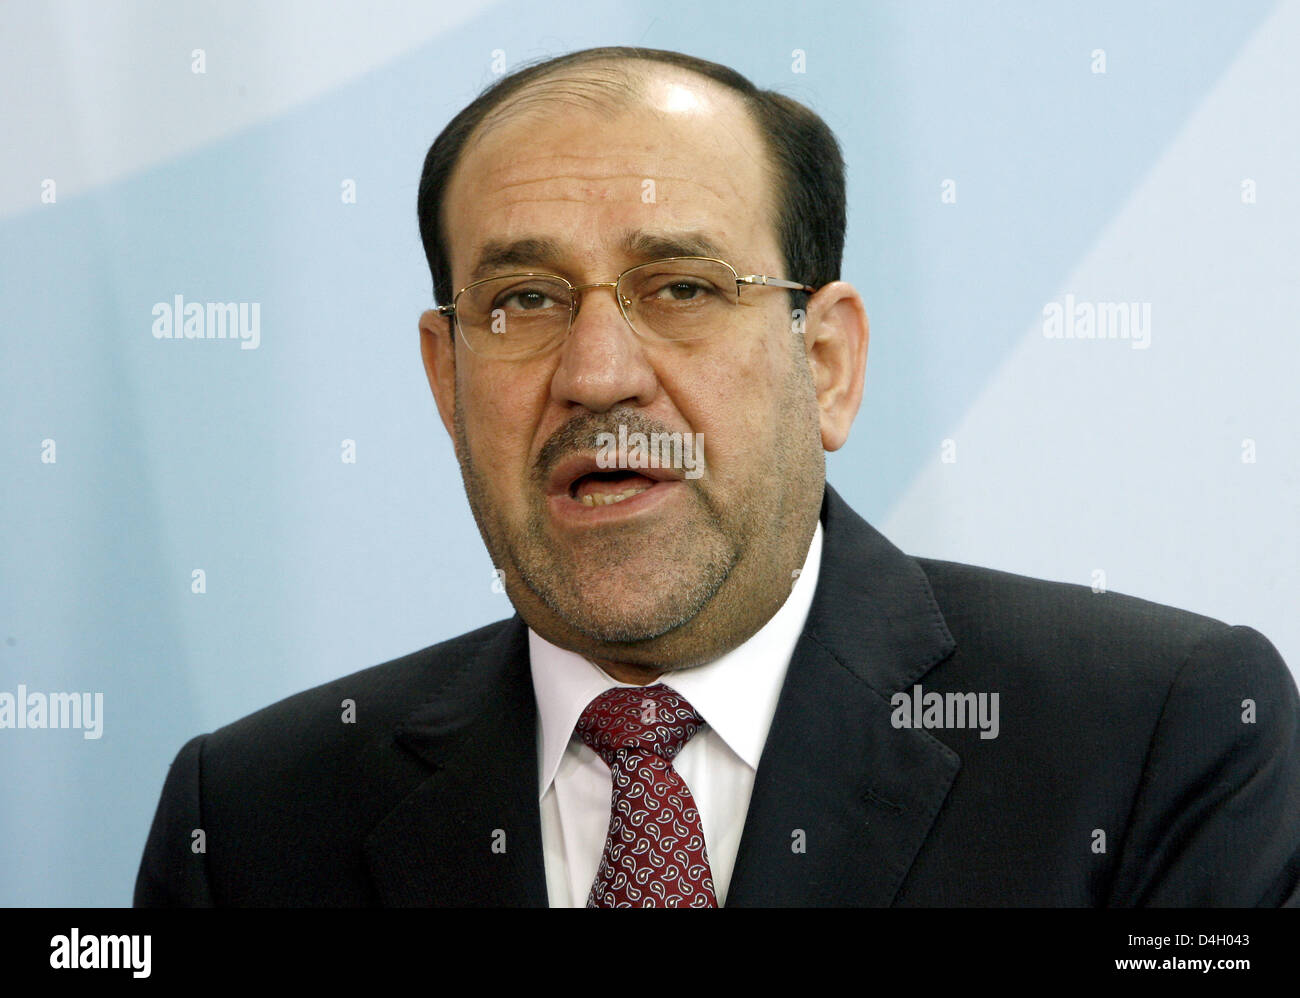 Iraqi Prime Minister Nuri al-Maliki is pictured in the Chancellery in Berlin, Germany, 22 July 2008. Maliki is on an official visit to Germany for several days. Photo: Wolfgang Kumm Stock Photo